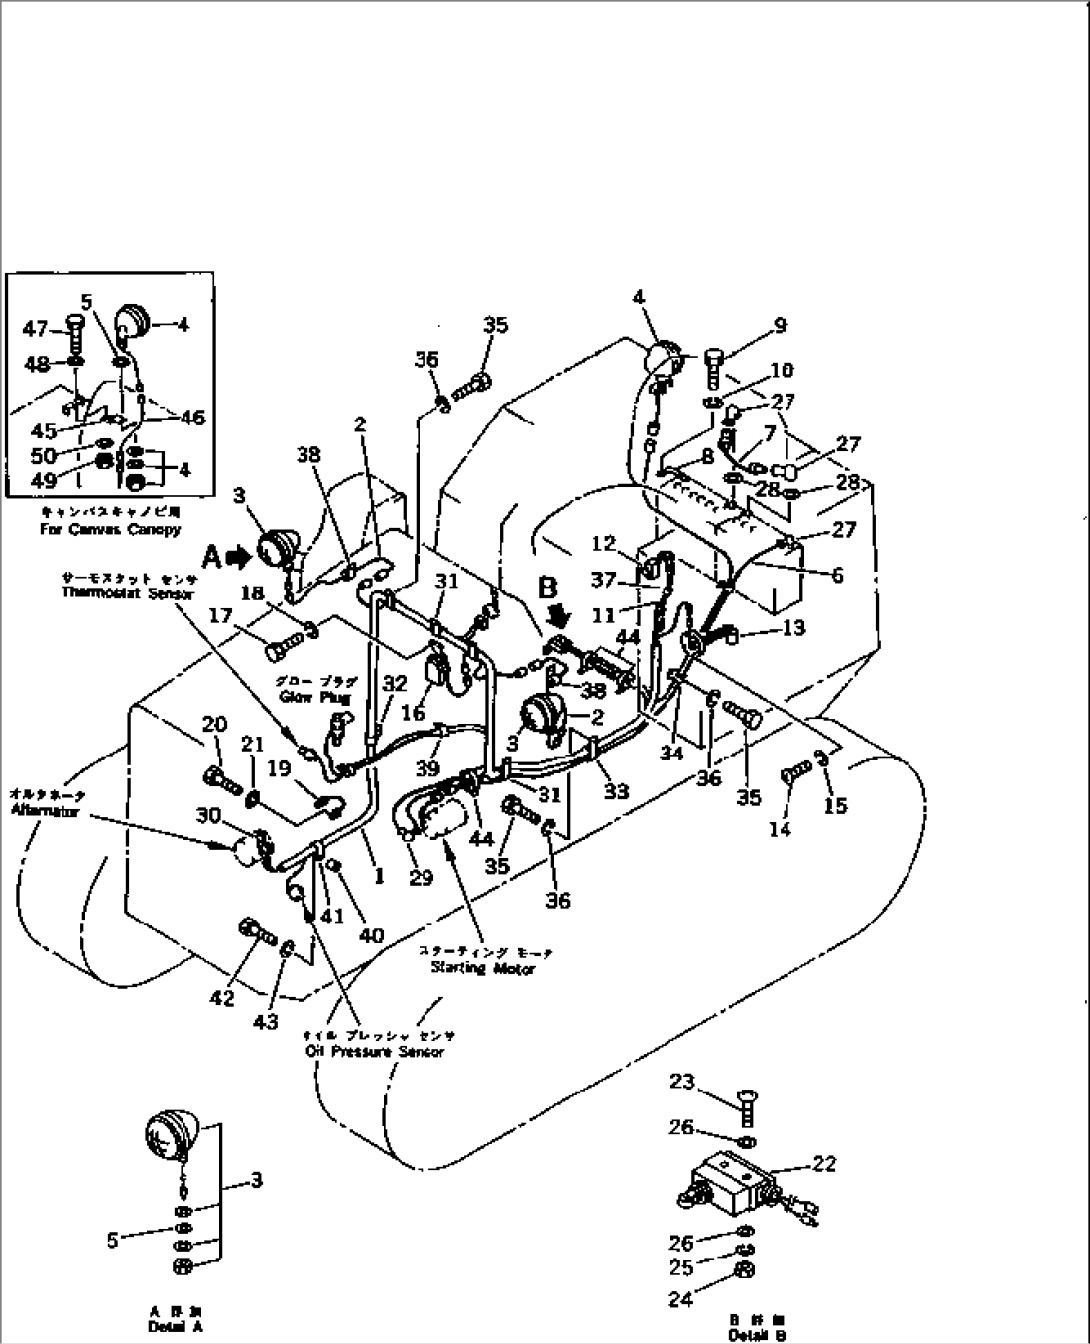 ELECTRICAL SYSTEM (FOR F2-R2 TRANSMISSION)